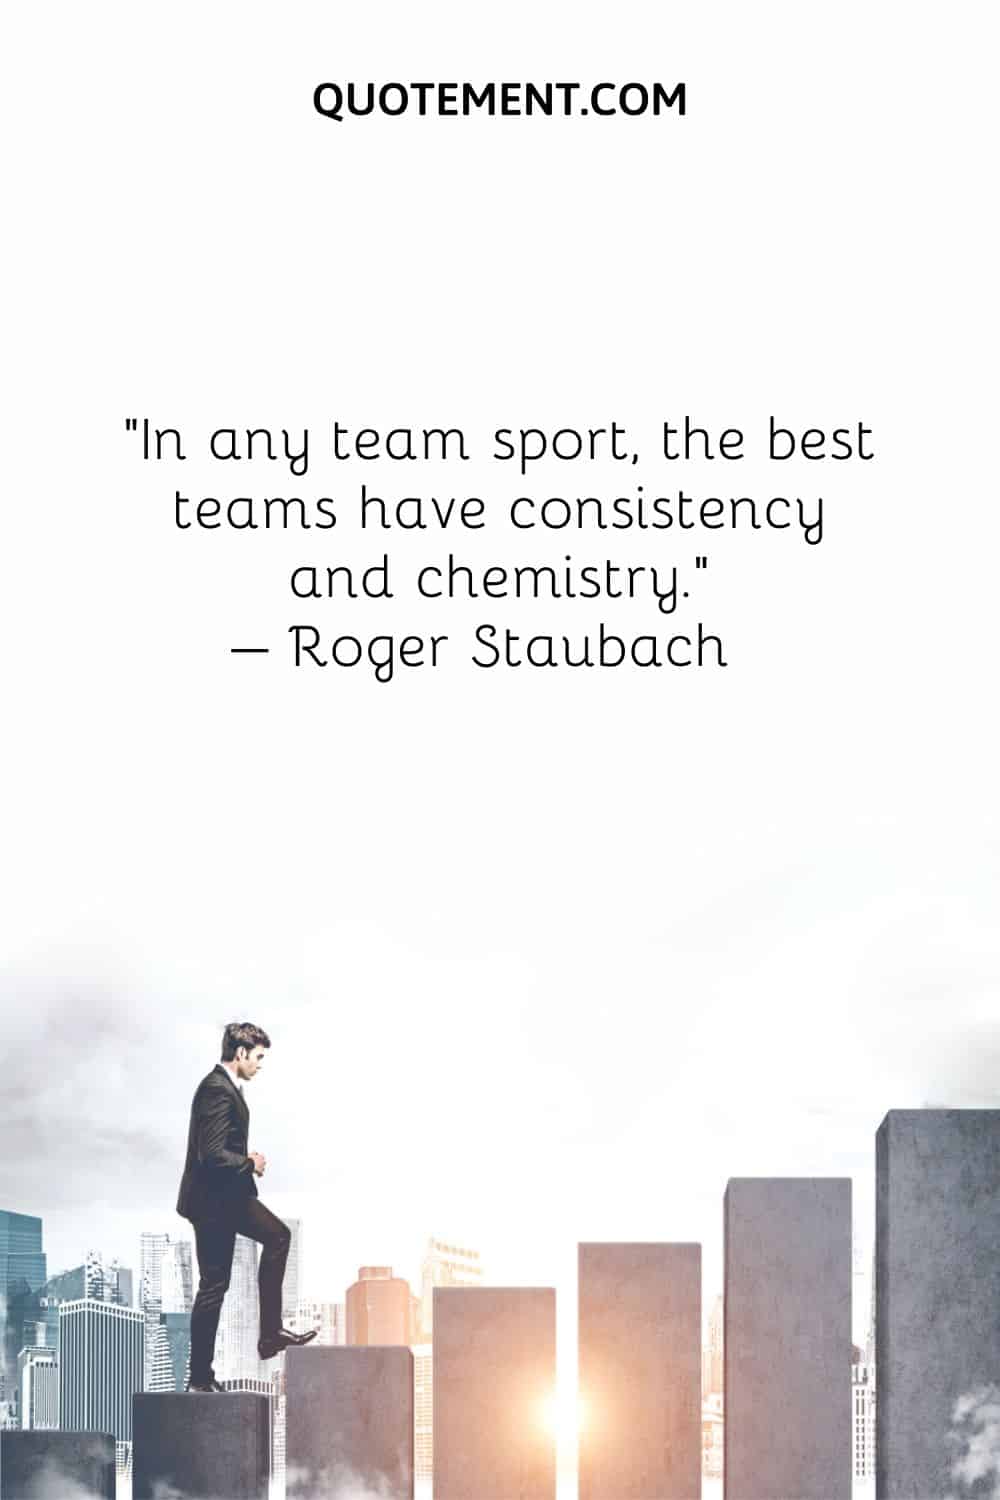 In any team sport, the best teams have consistency and chemistry